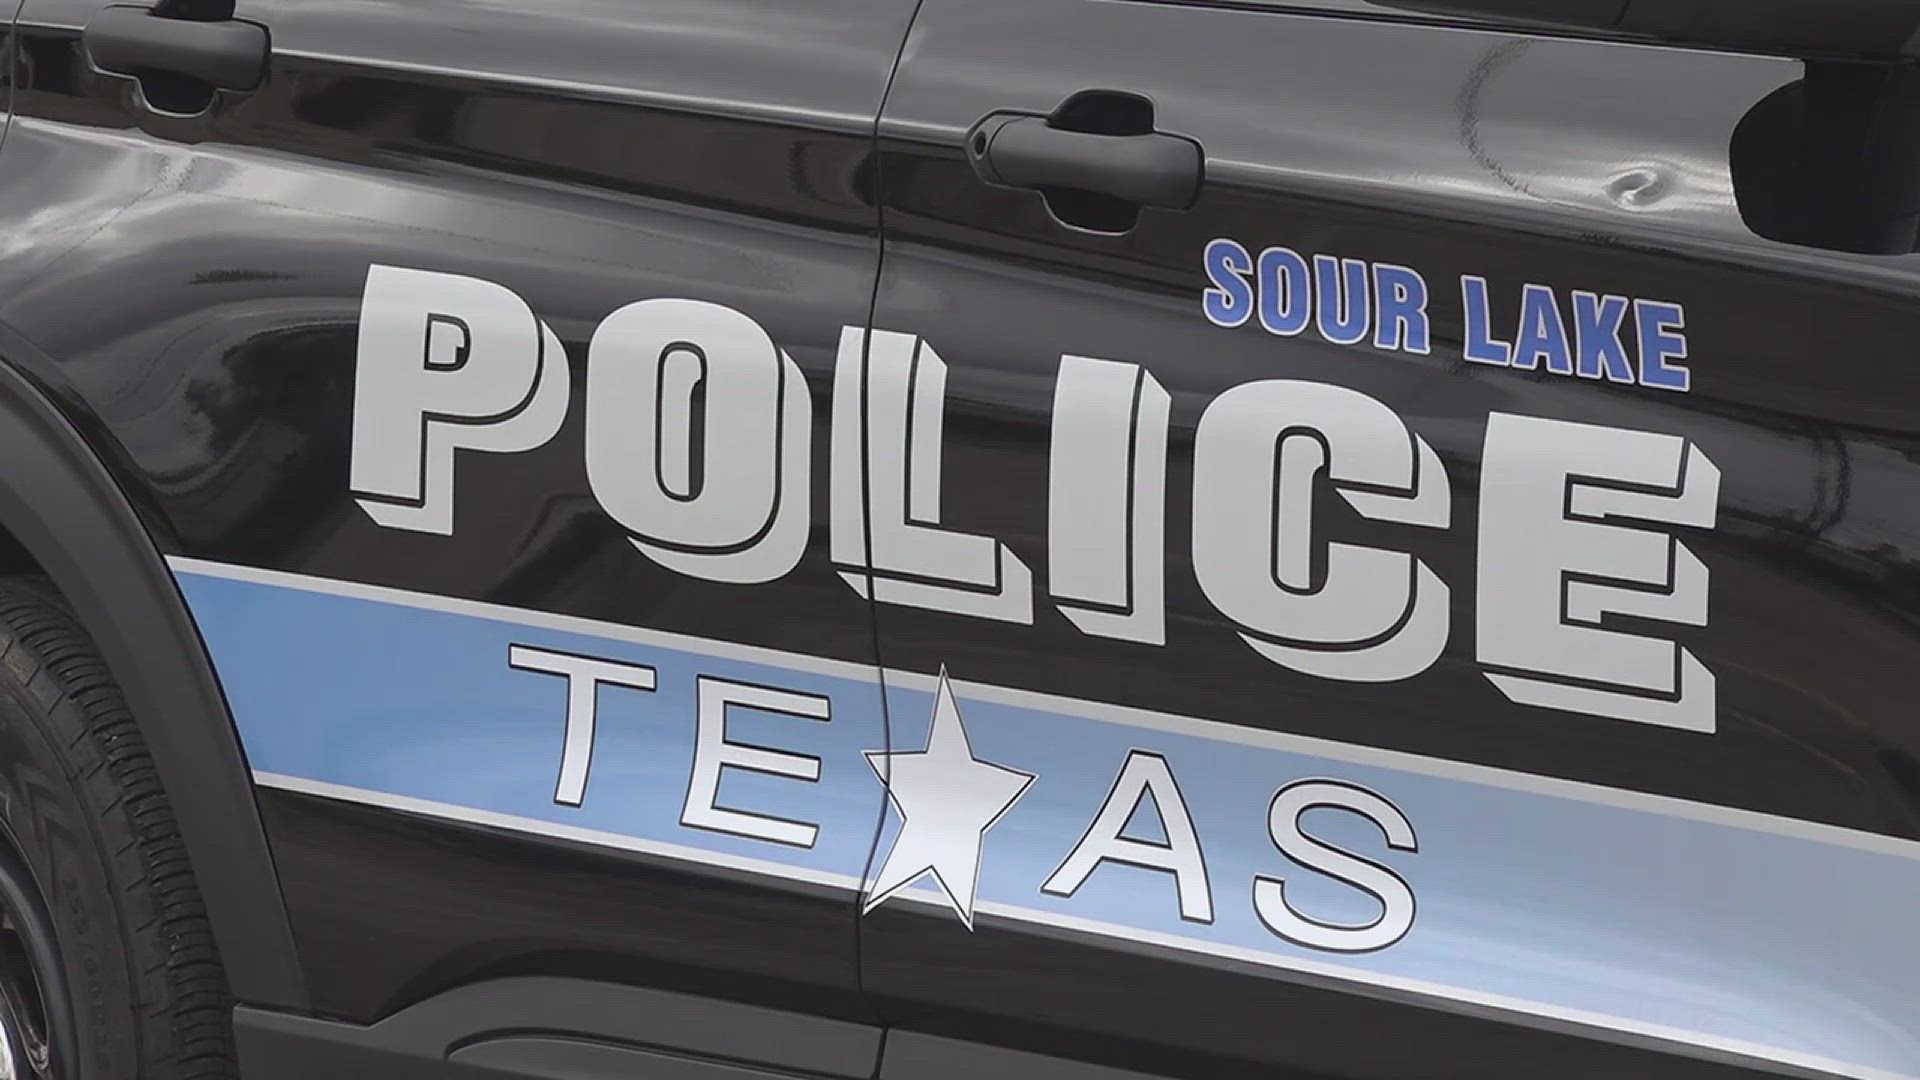 Texas legislation says they have a surplus in their budget of $50 billion, which would cover the costs of raising wages for smaller police agencies.